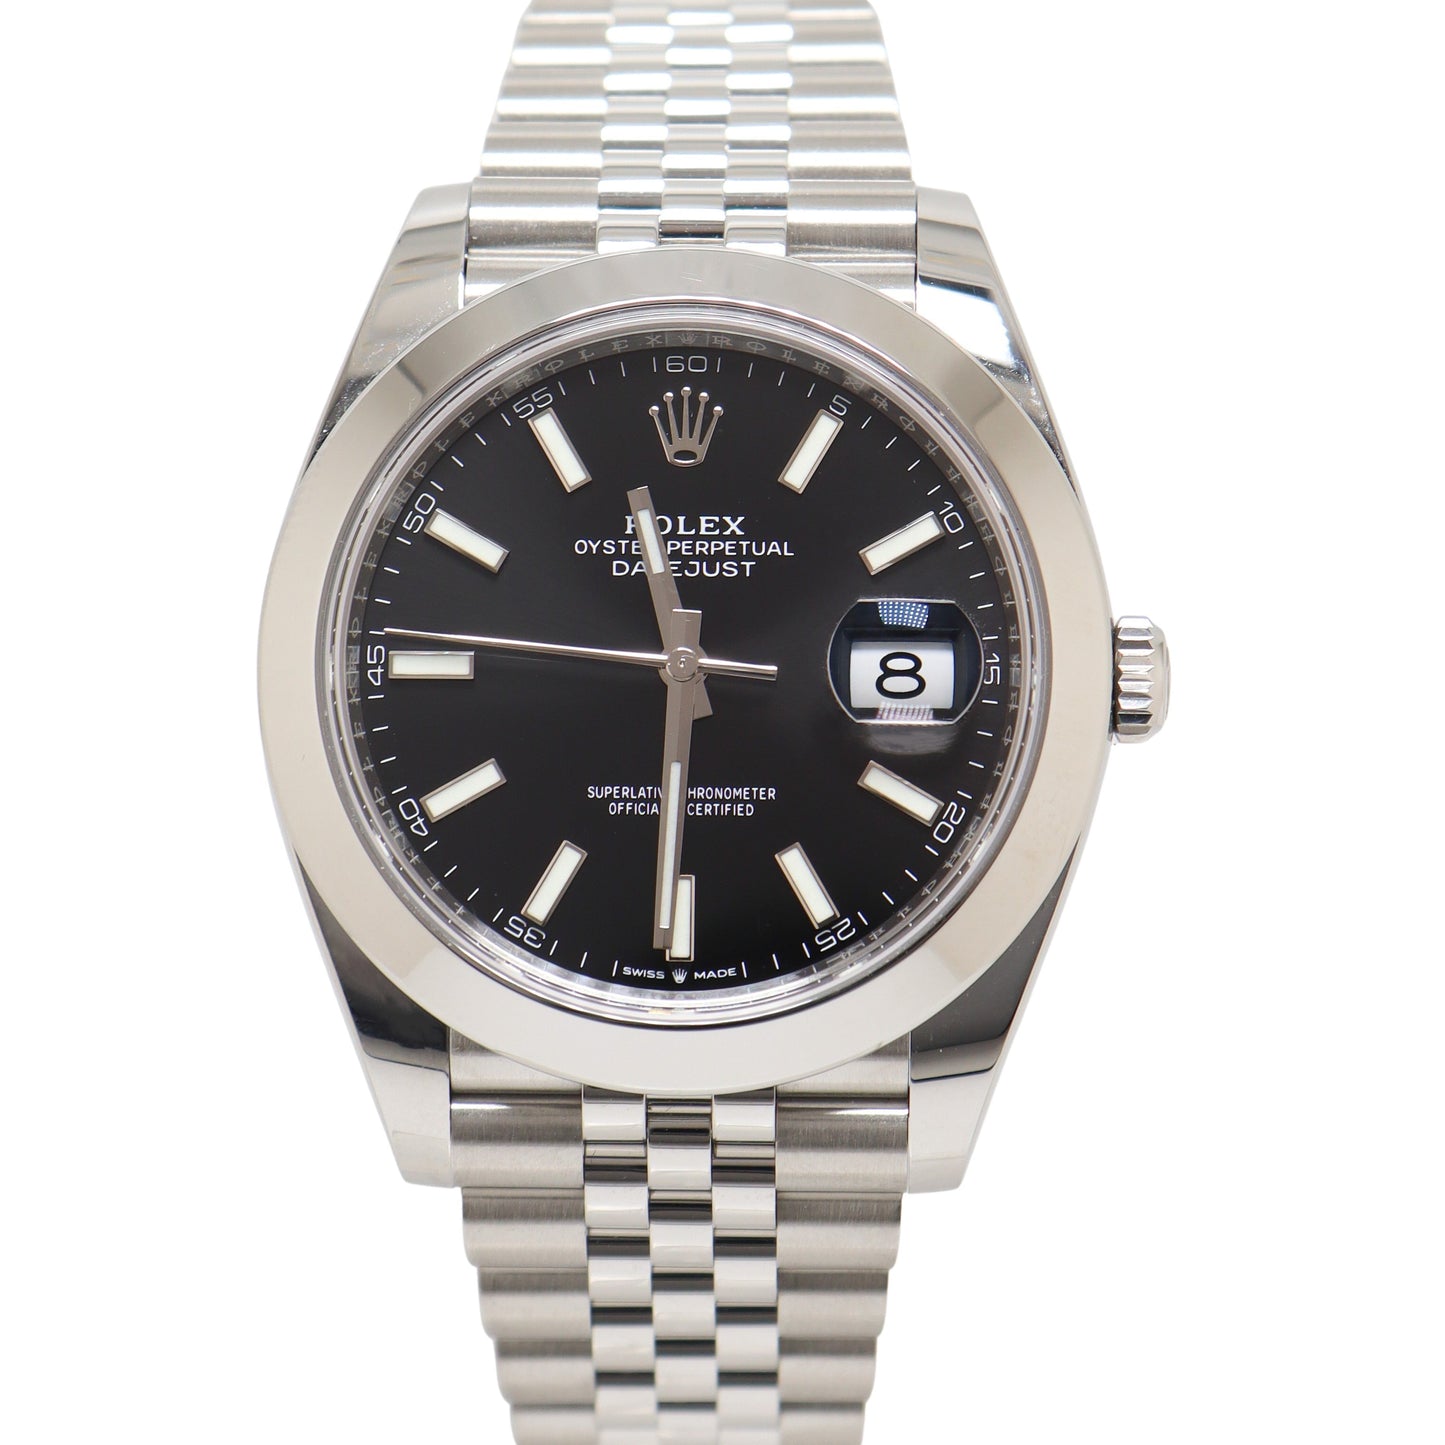 Load image into Gallery viewer, Rolex Datejust Stainless Steel 41mm Black Stick Dial Watch Reference#: 126300 - Happy Jewelers Fine Jewelry Lifetime Warranty
